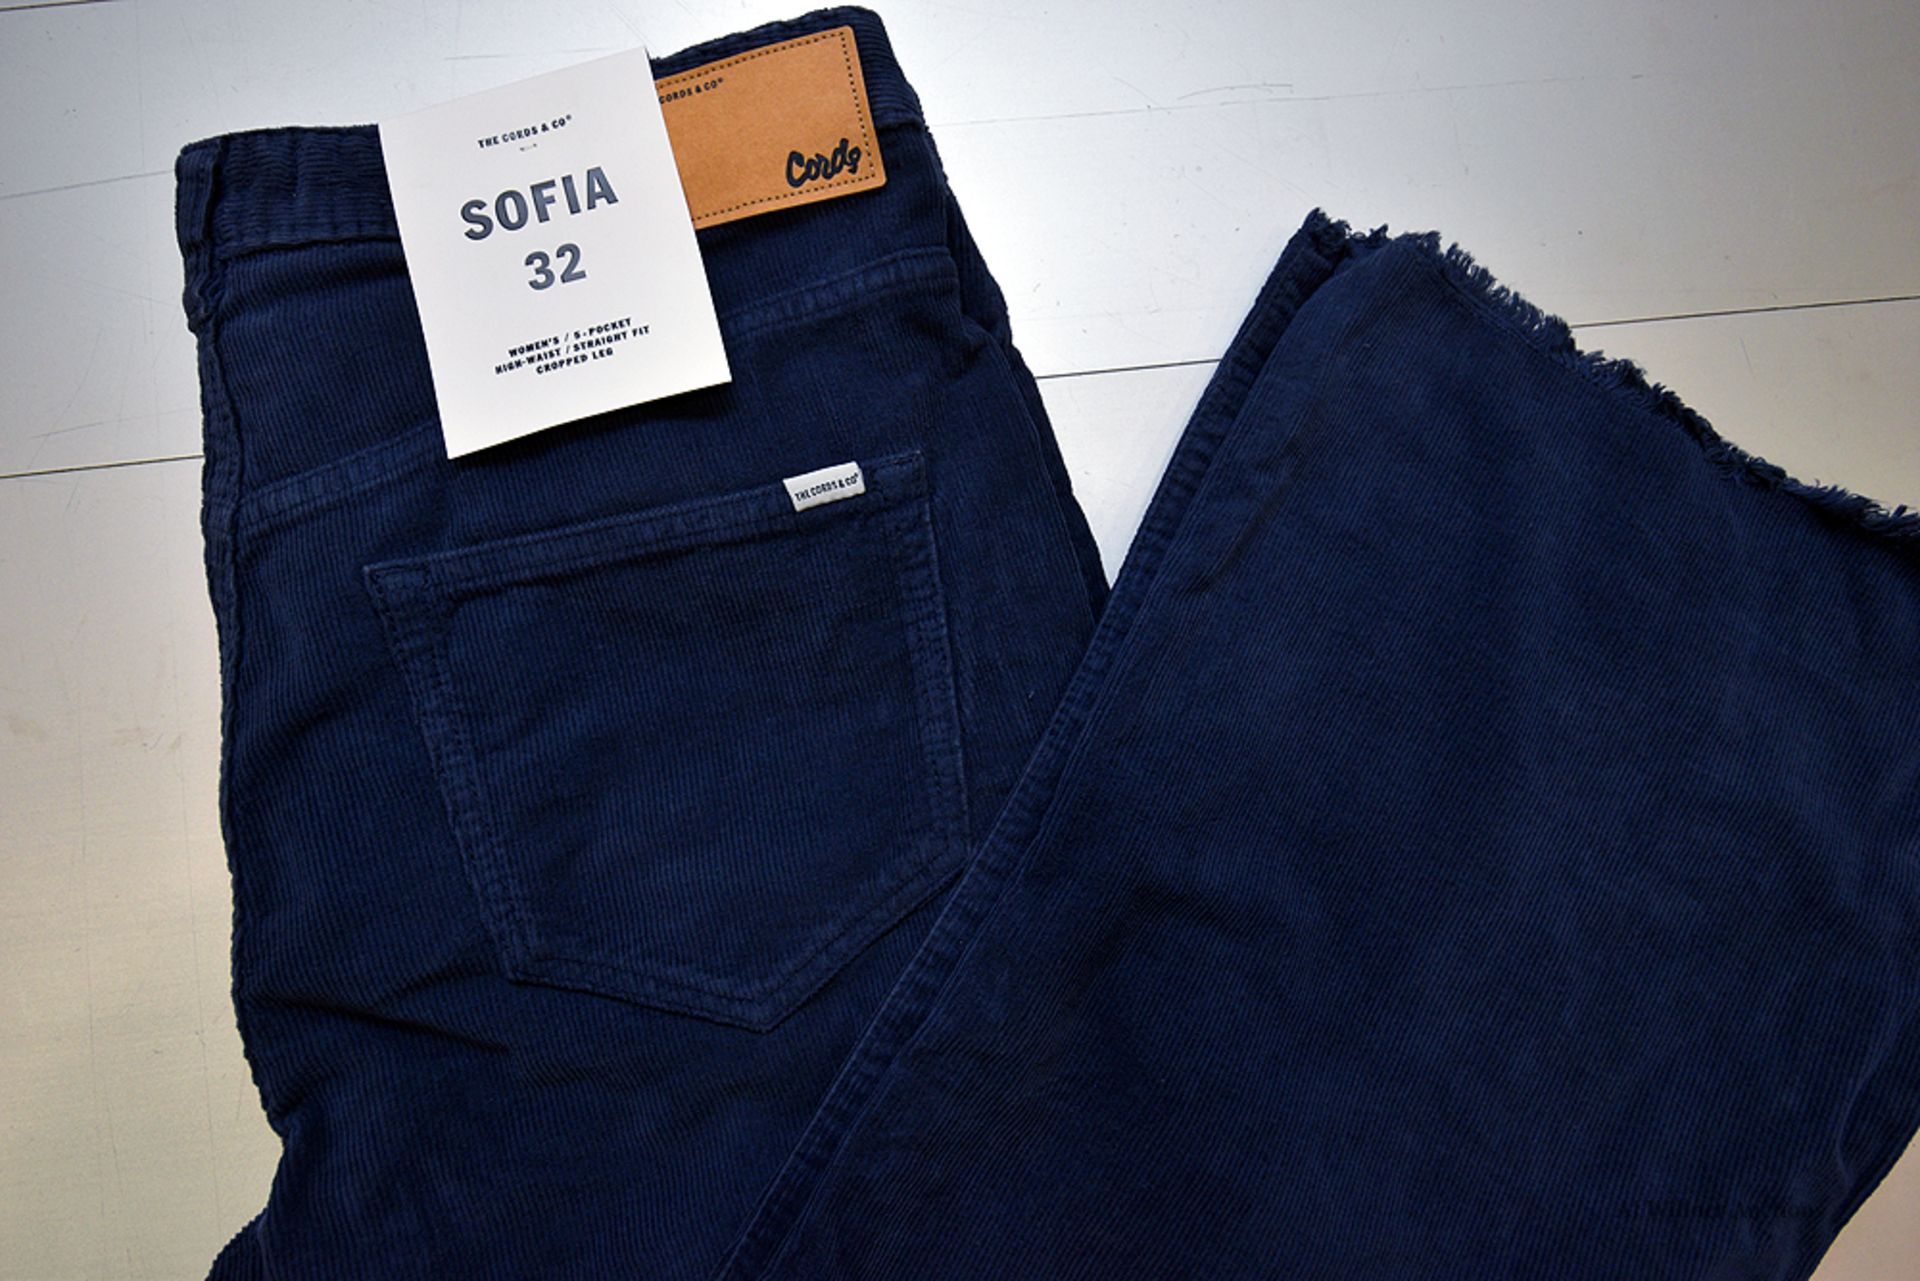 The Cords & Co. "Sofia" Style, Womens/ 5-Pocket/High-Waist/ Straight Fit/ Cropped Leg Pants( Indigo) - Image 2 of 3